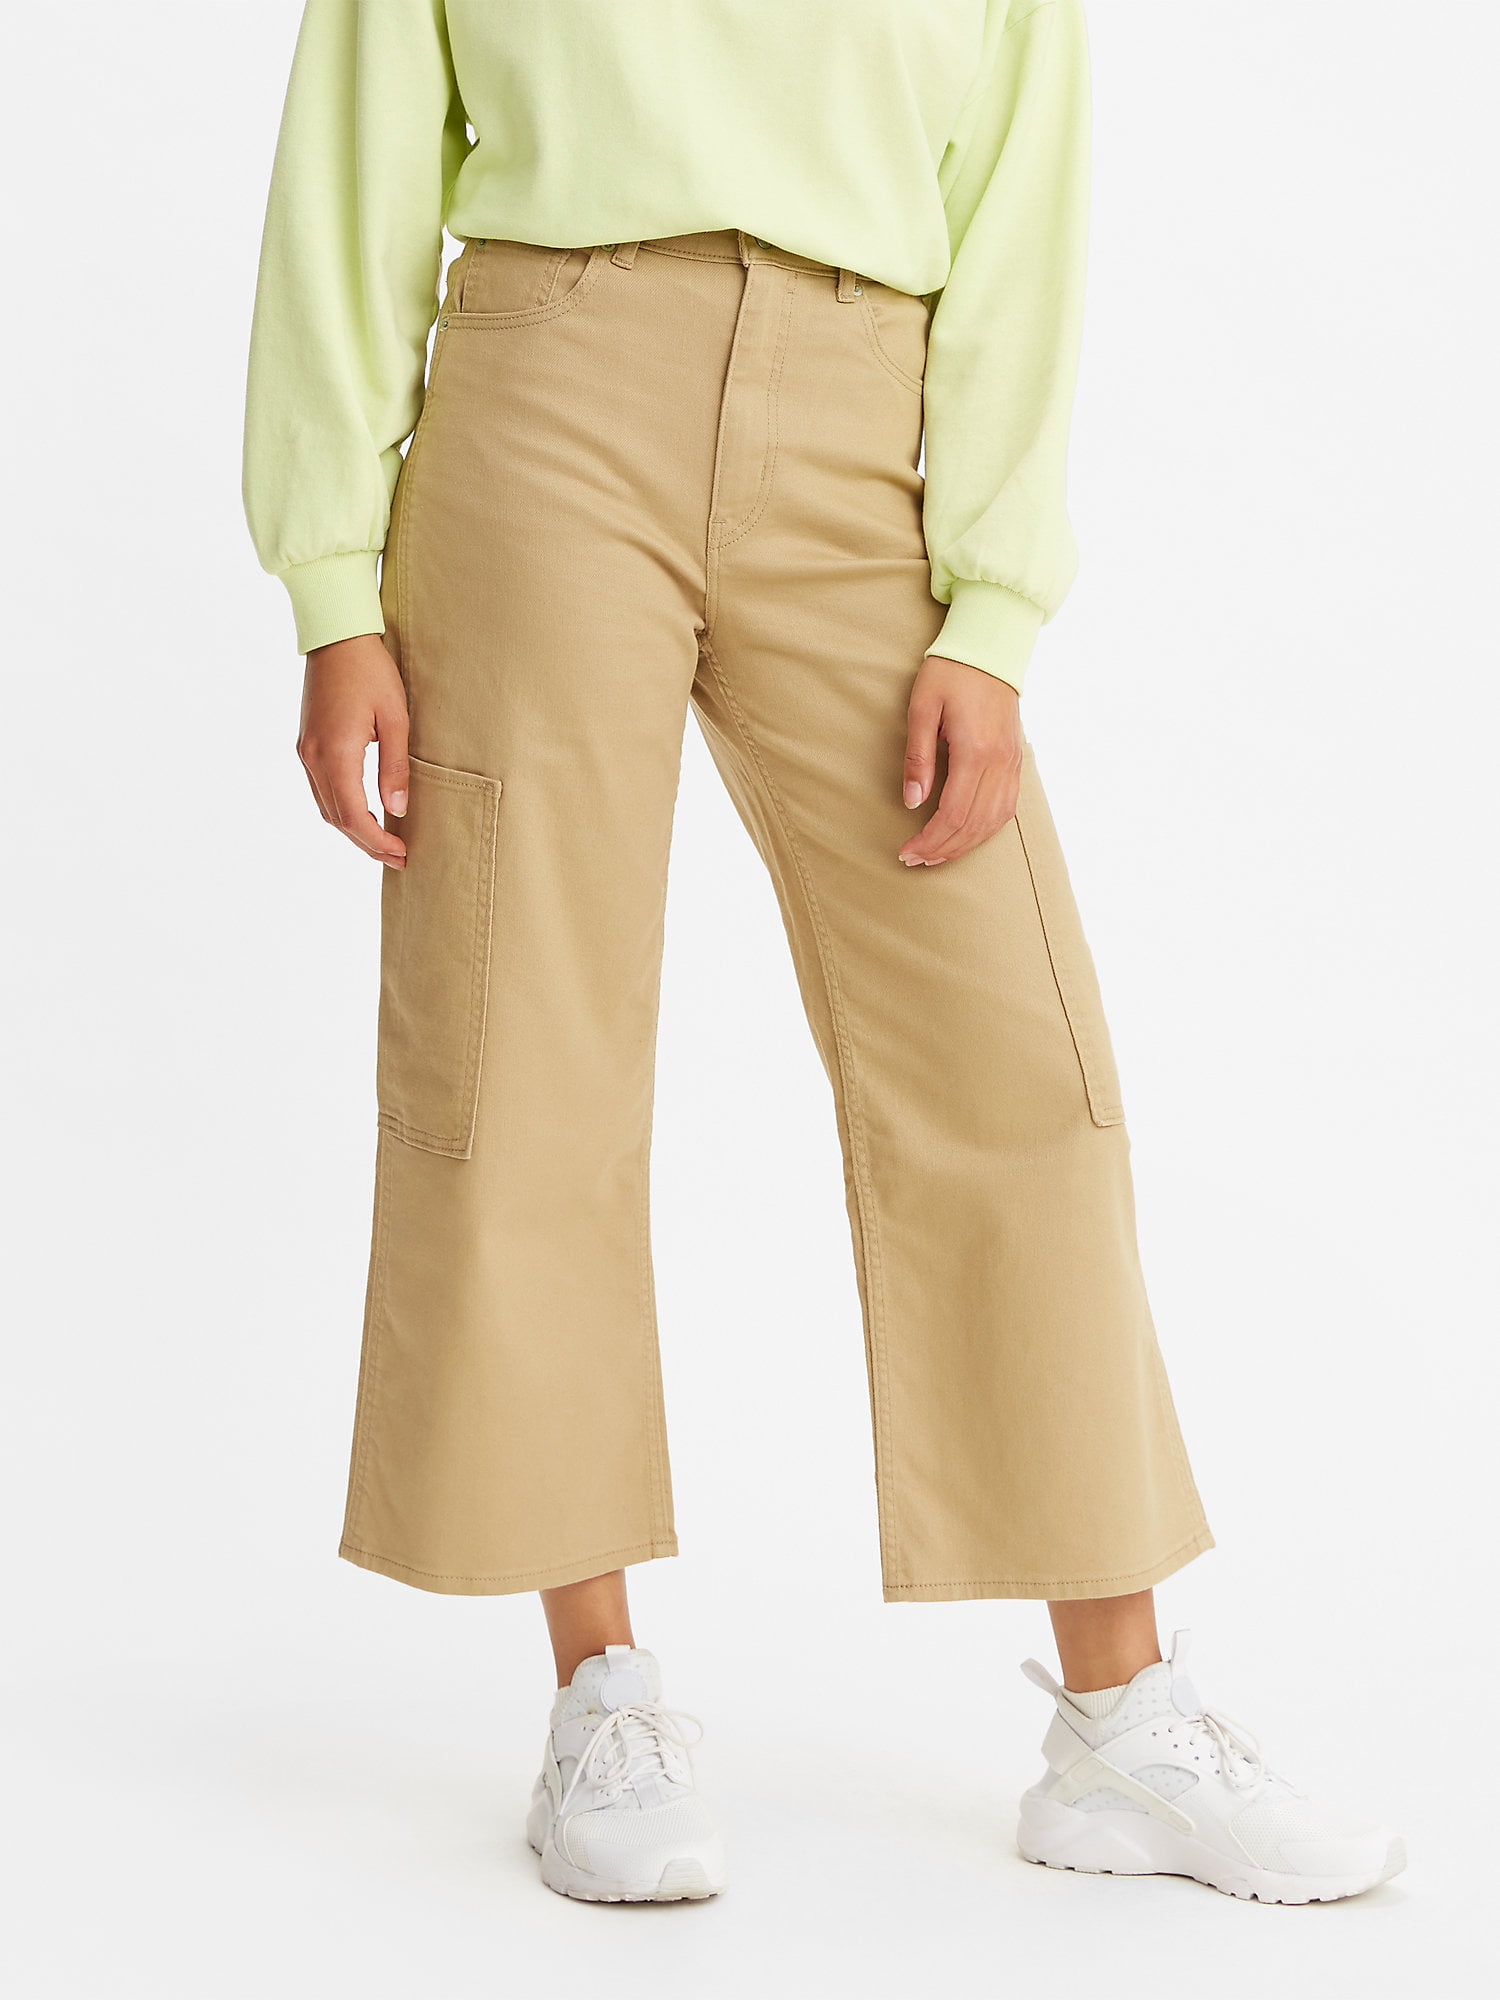 Levi's Women's High-Waisted Wide-Leg Cropped Utllity Pants 